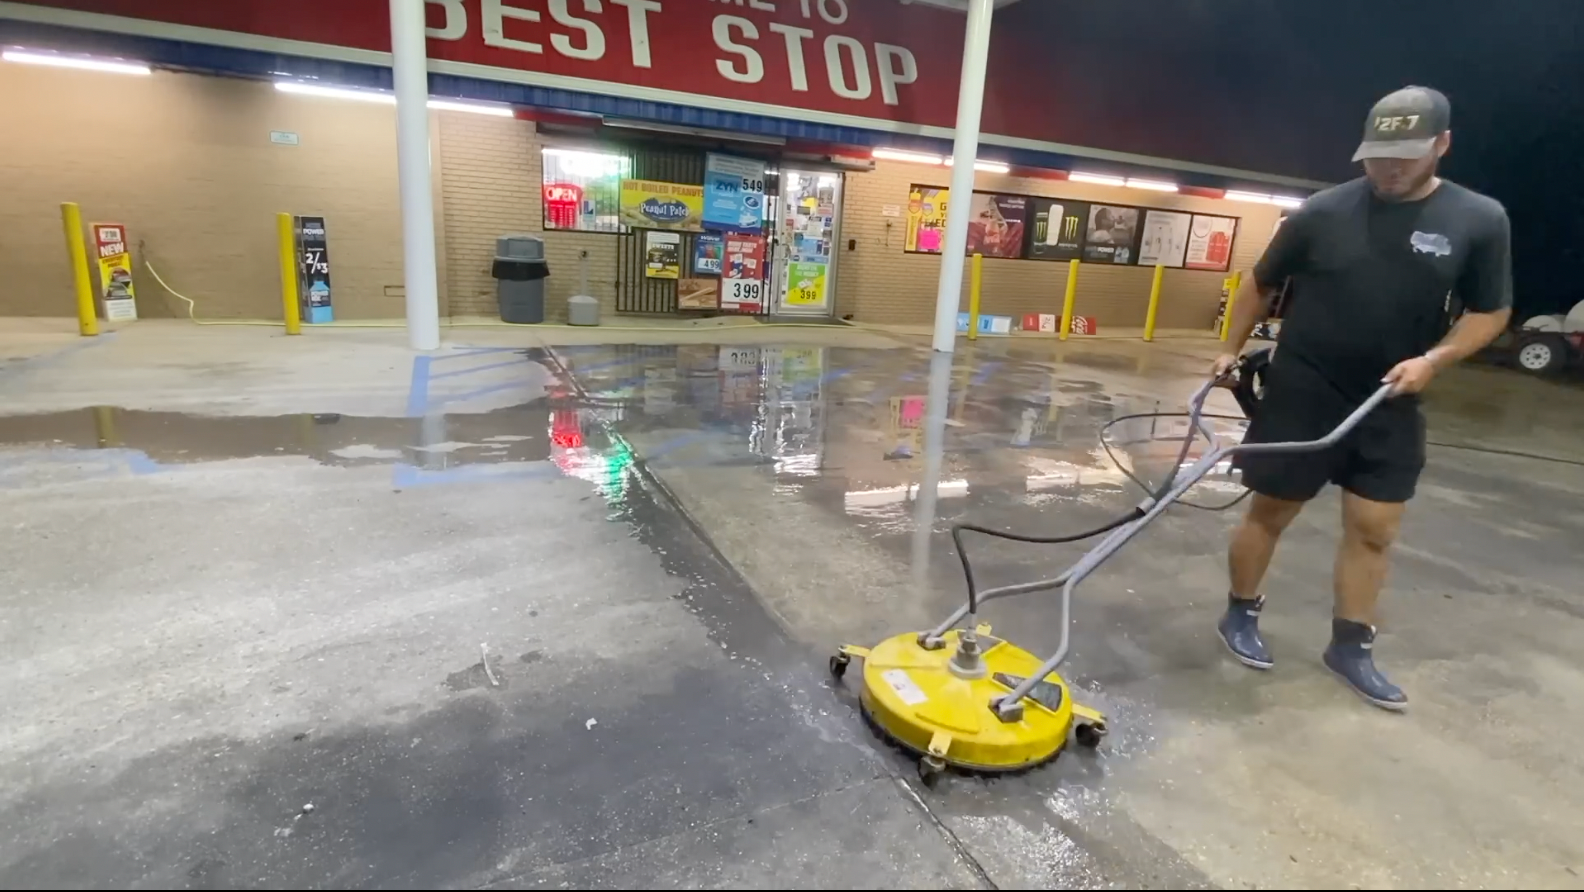 Gas Station Pressure Washing & Cleaning in Baton Rouge